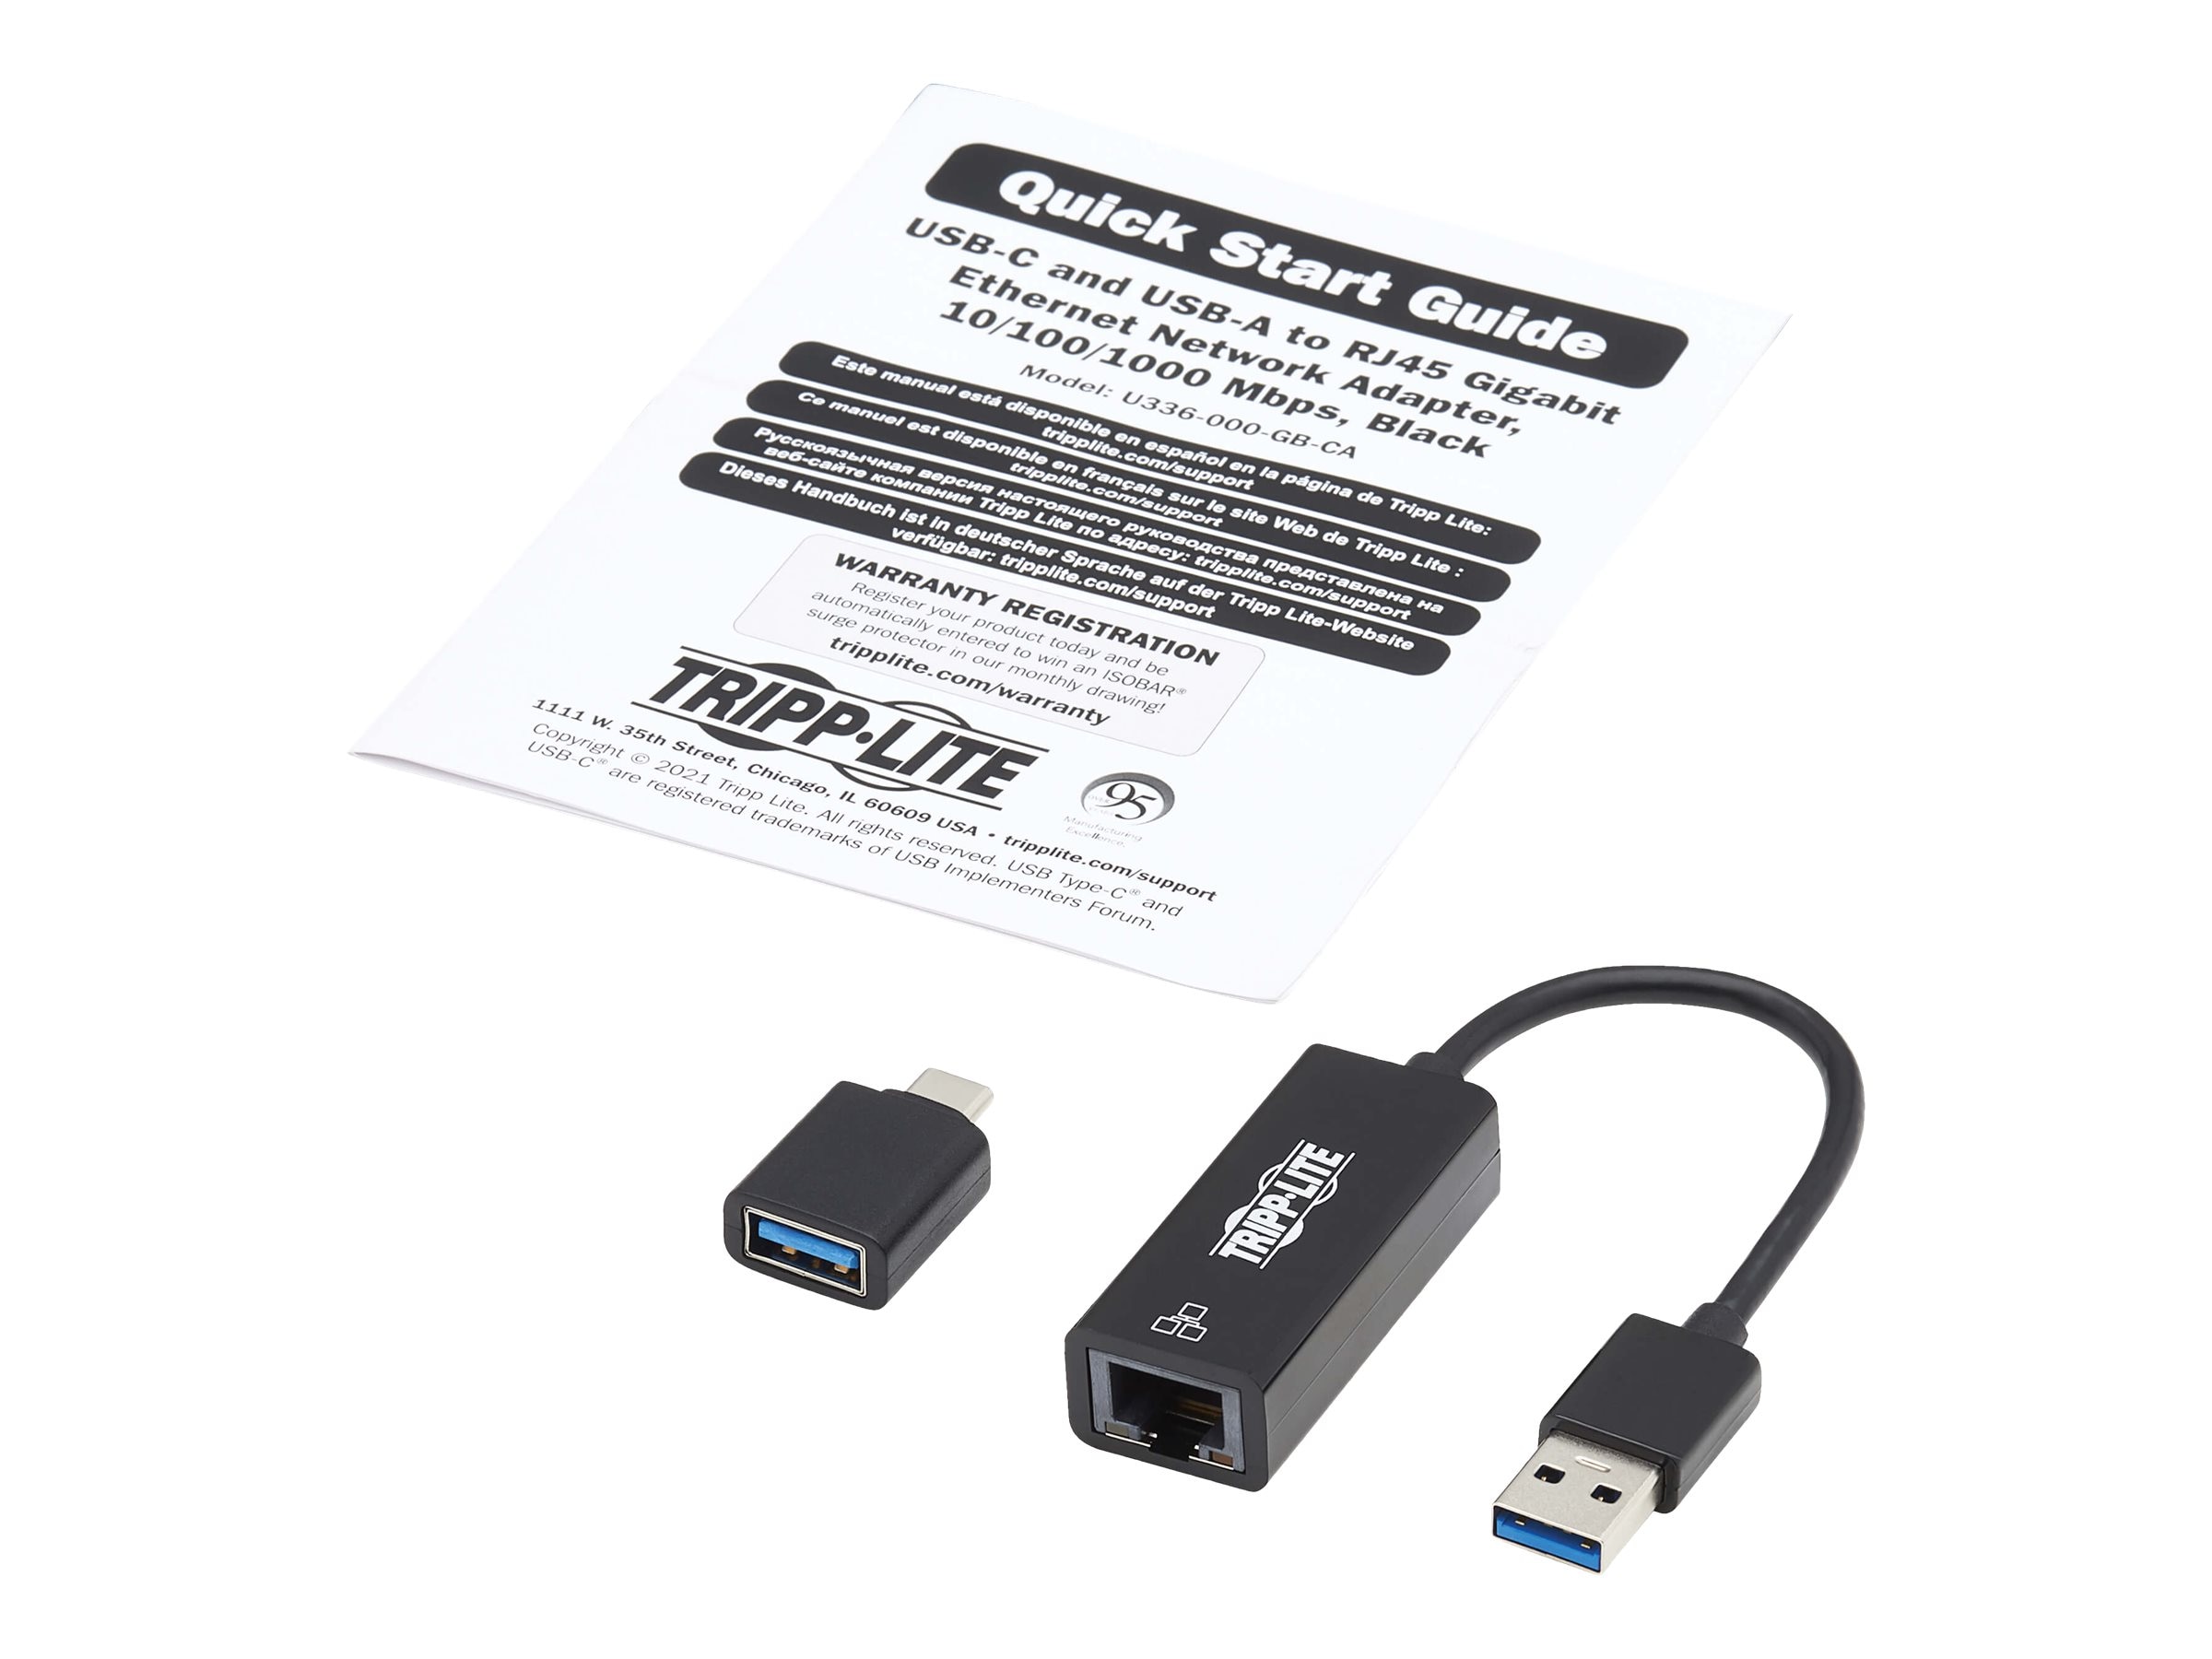 USB-C/USB-A to RJ45 1Gb Ethernet Dongle